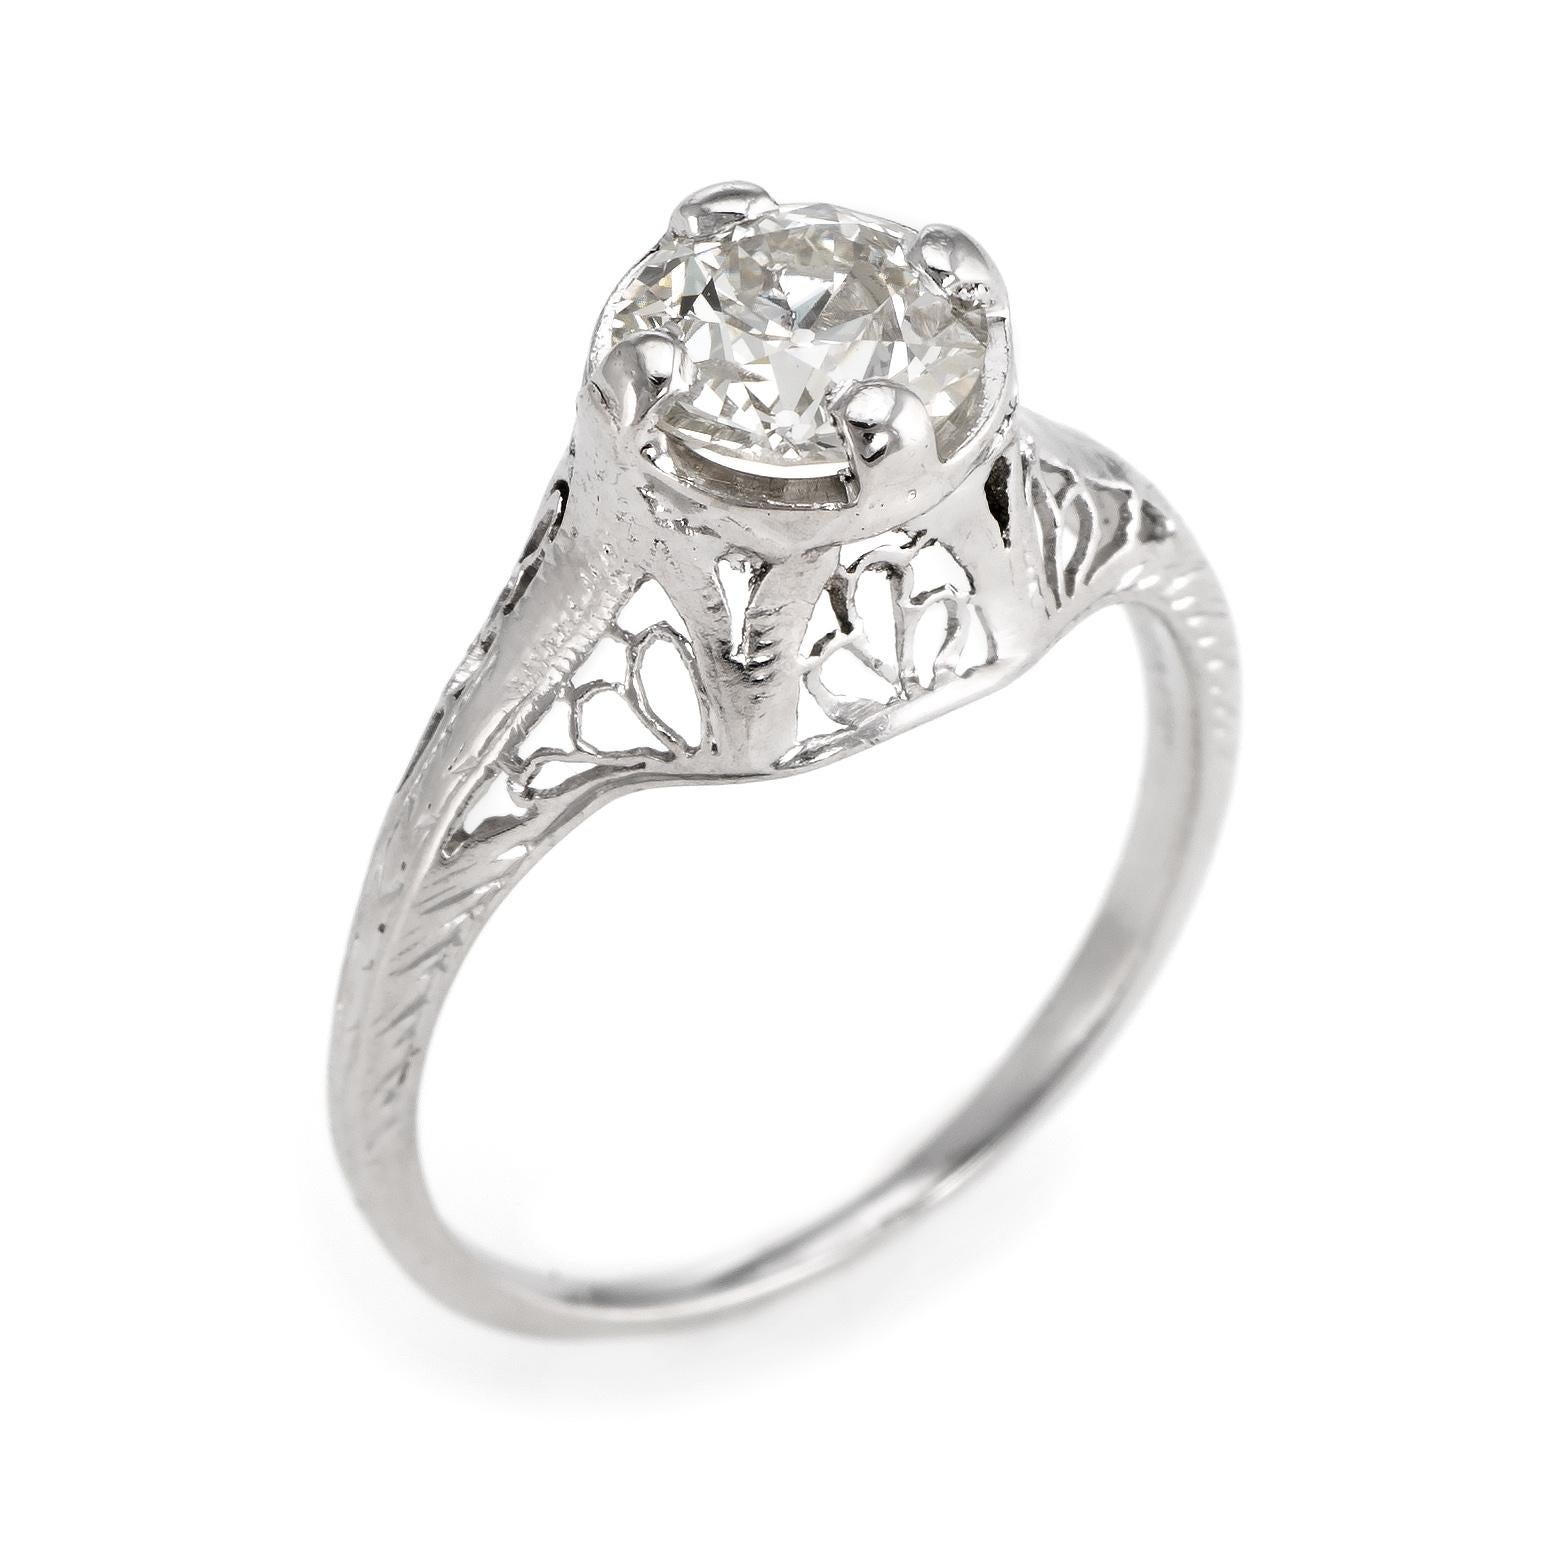 Elegant & finely detailed Art Deco era ring (circa 1920s to 1930s), crafted in 14 karat white gold. 

Centrally mounted estimated 1 carat Old Mine cut (estimated at I-J color and I1 clarity).   

The ring epitomizes vintage charm and would make a